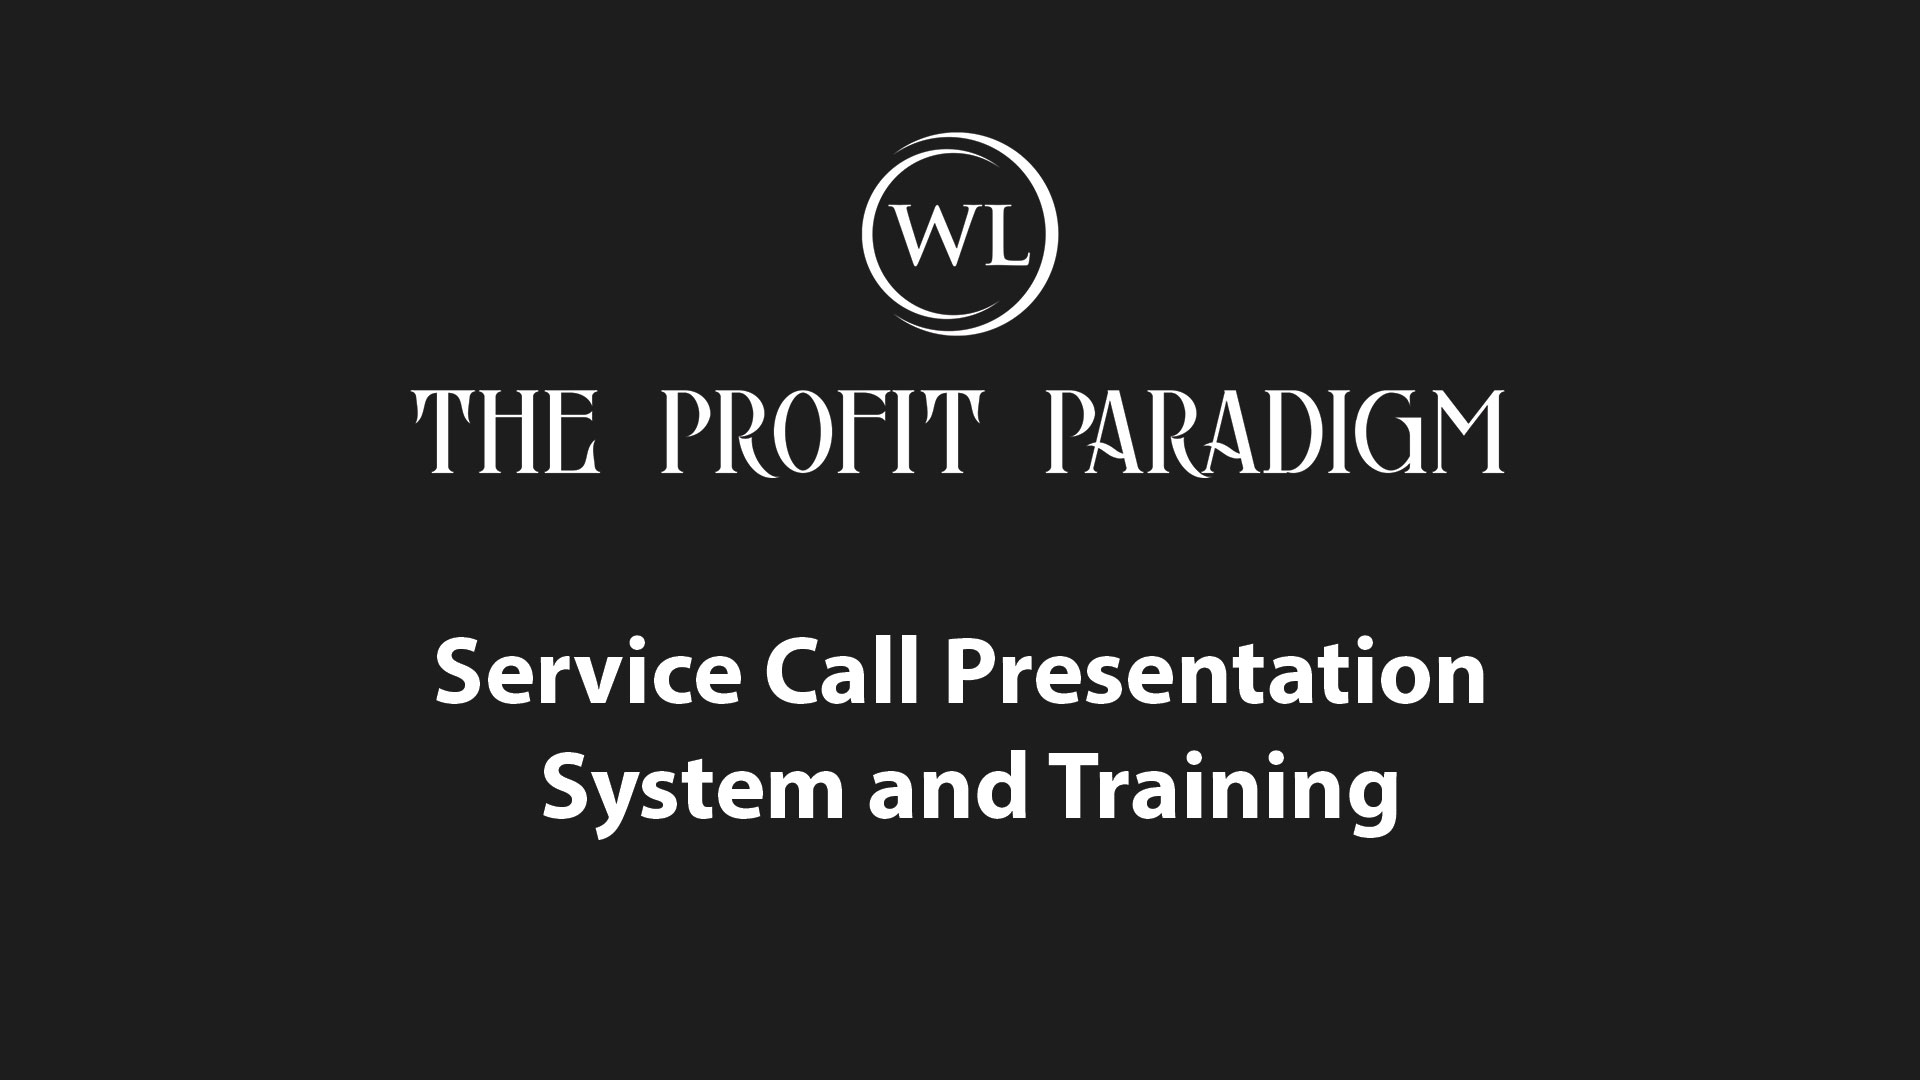 Service Call Presentation System and Training